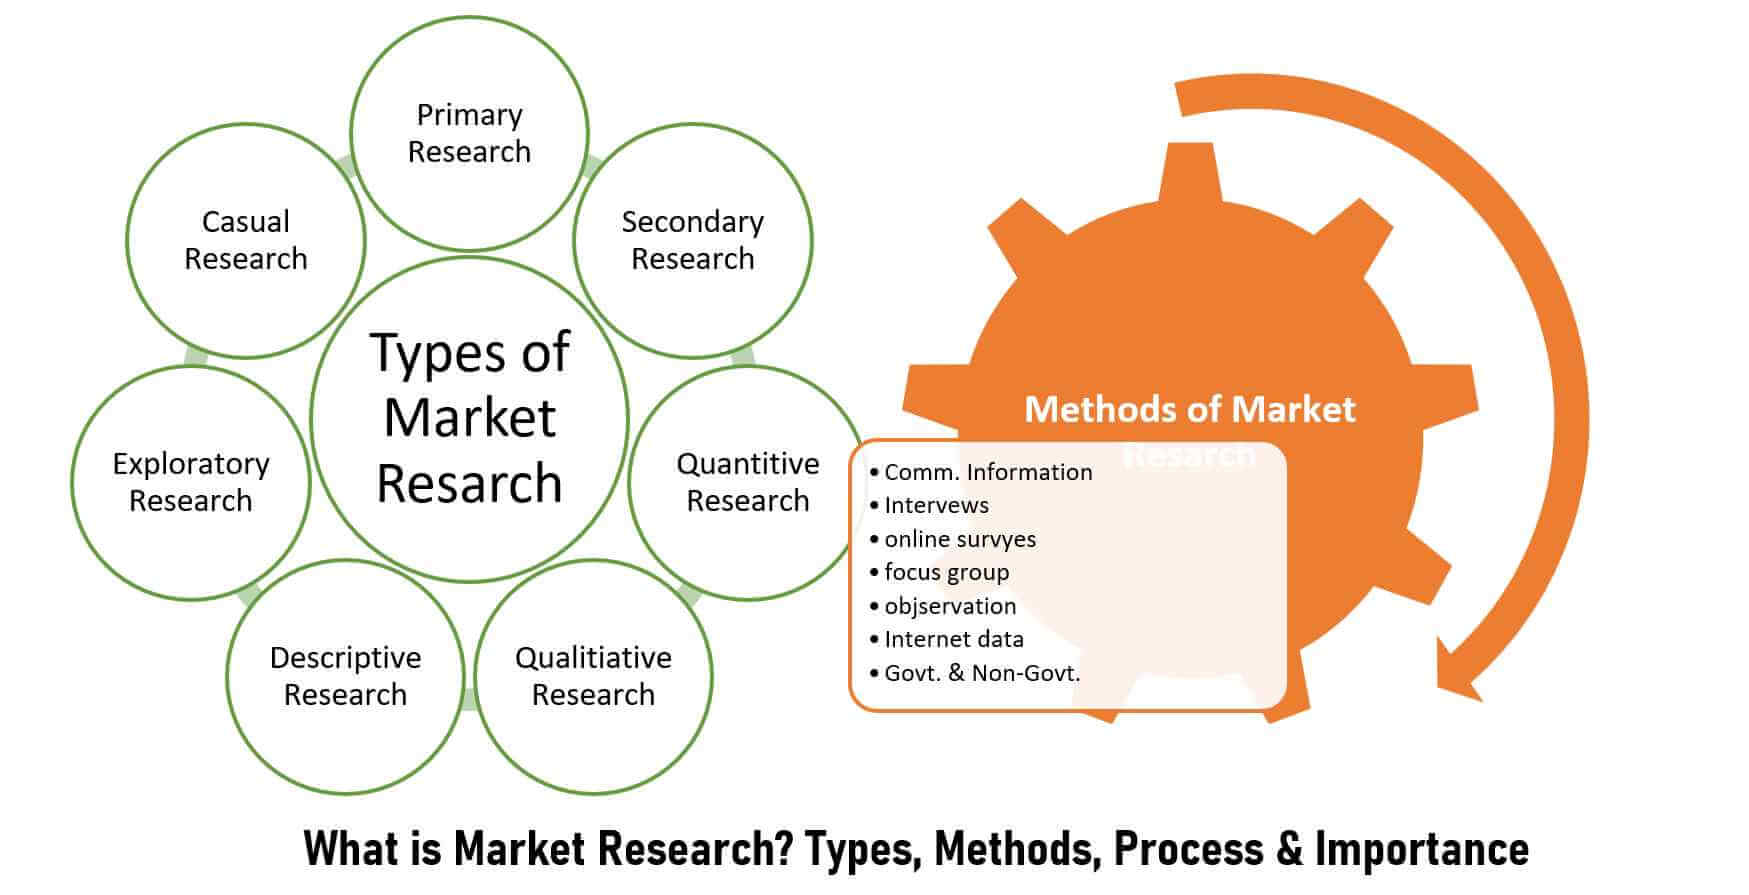 What Are the 5 Types of Market Research